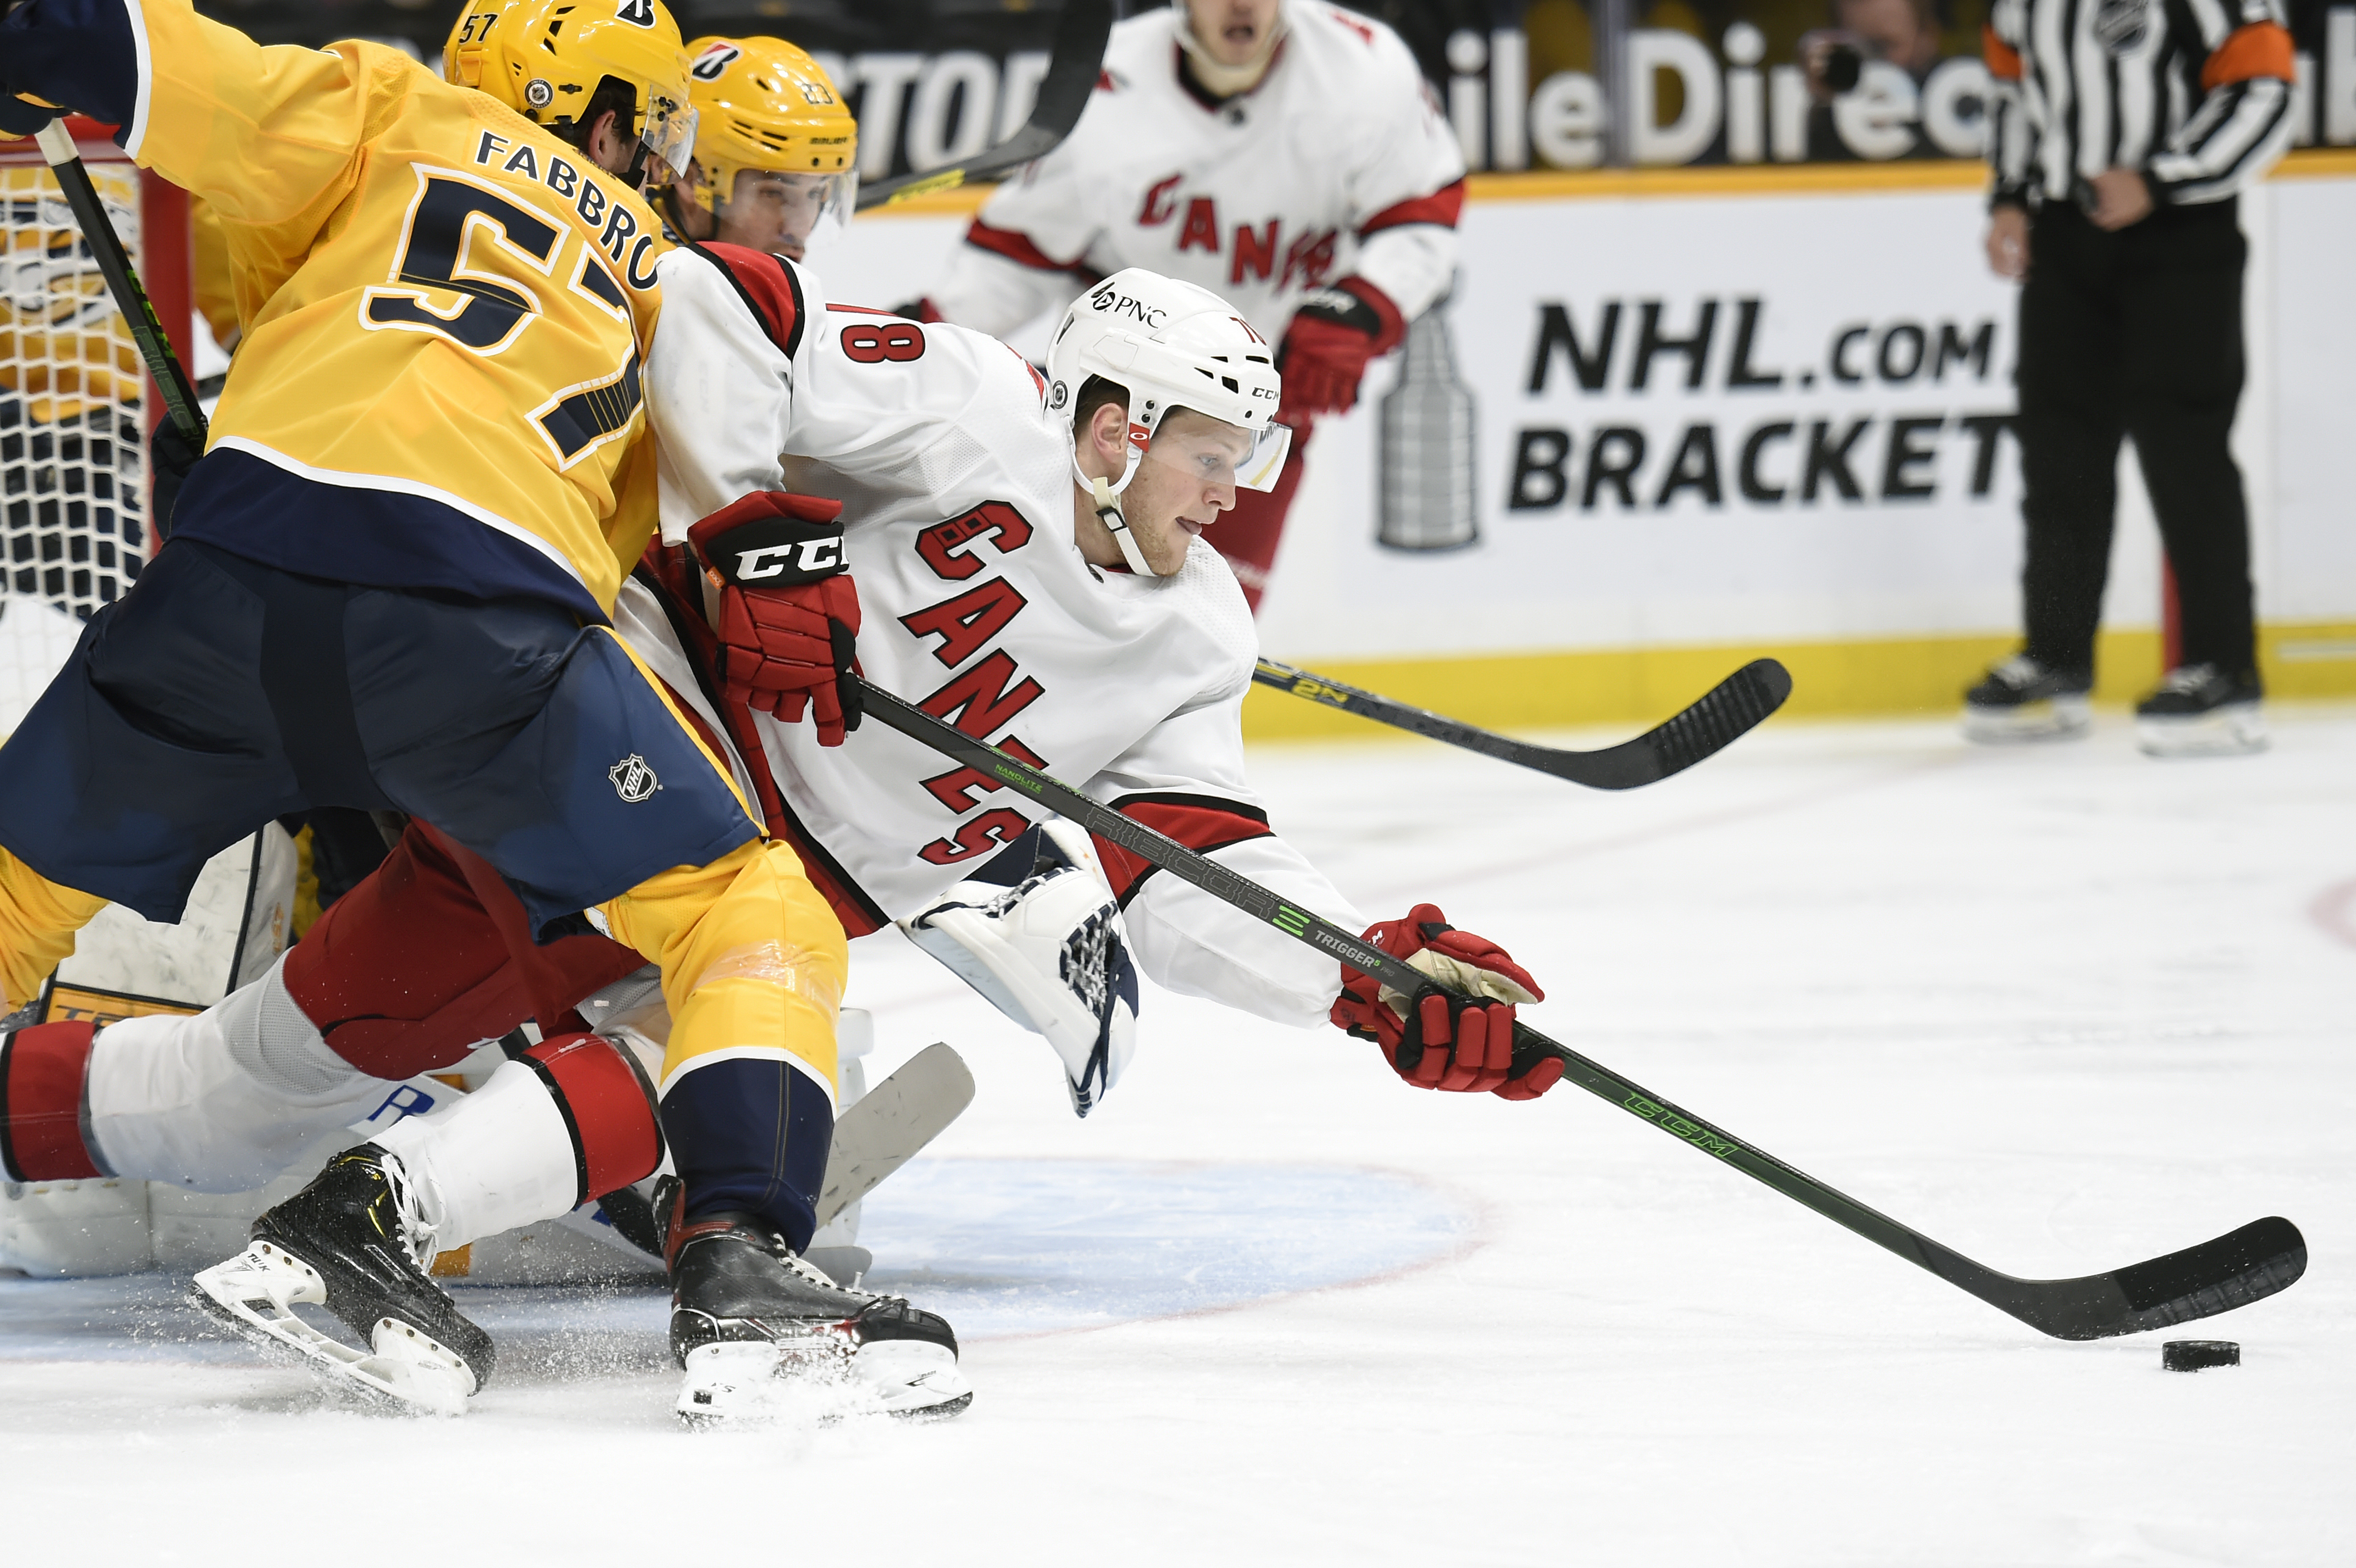 Predators-Hurricanes live stream (5/17) How to watch NHL Stanley Cup playoffs online, TV, time